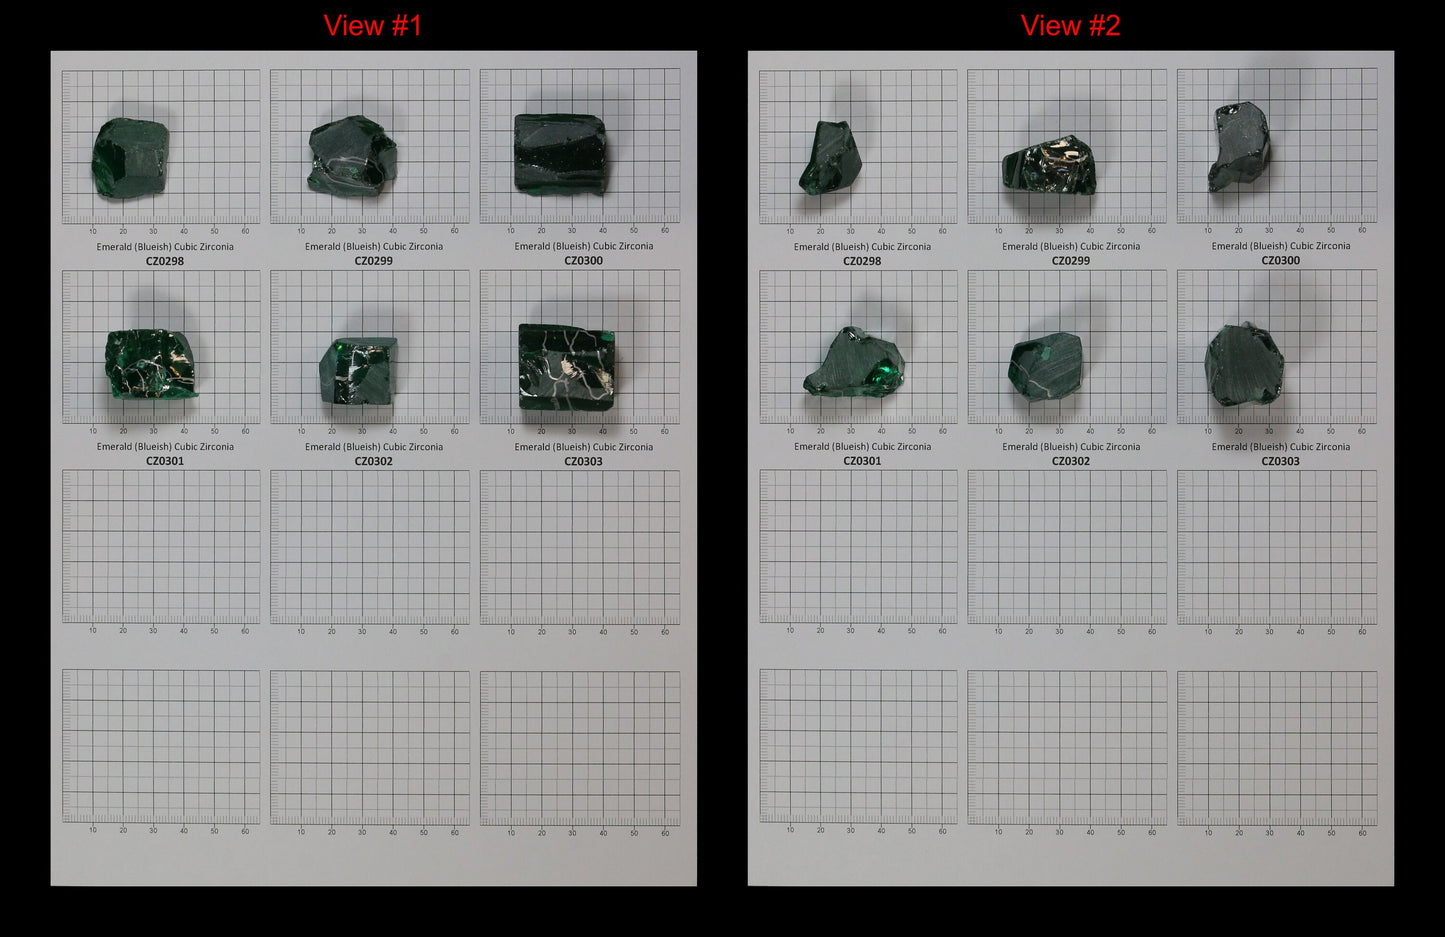 Emerald (Blueish) Cubic Zirconia Faceting Rough for Gem Cutting - Various Sizes